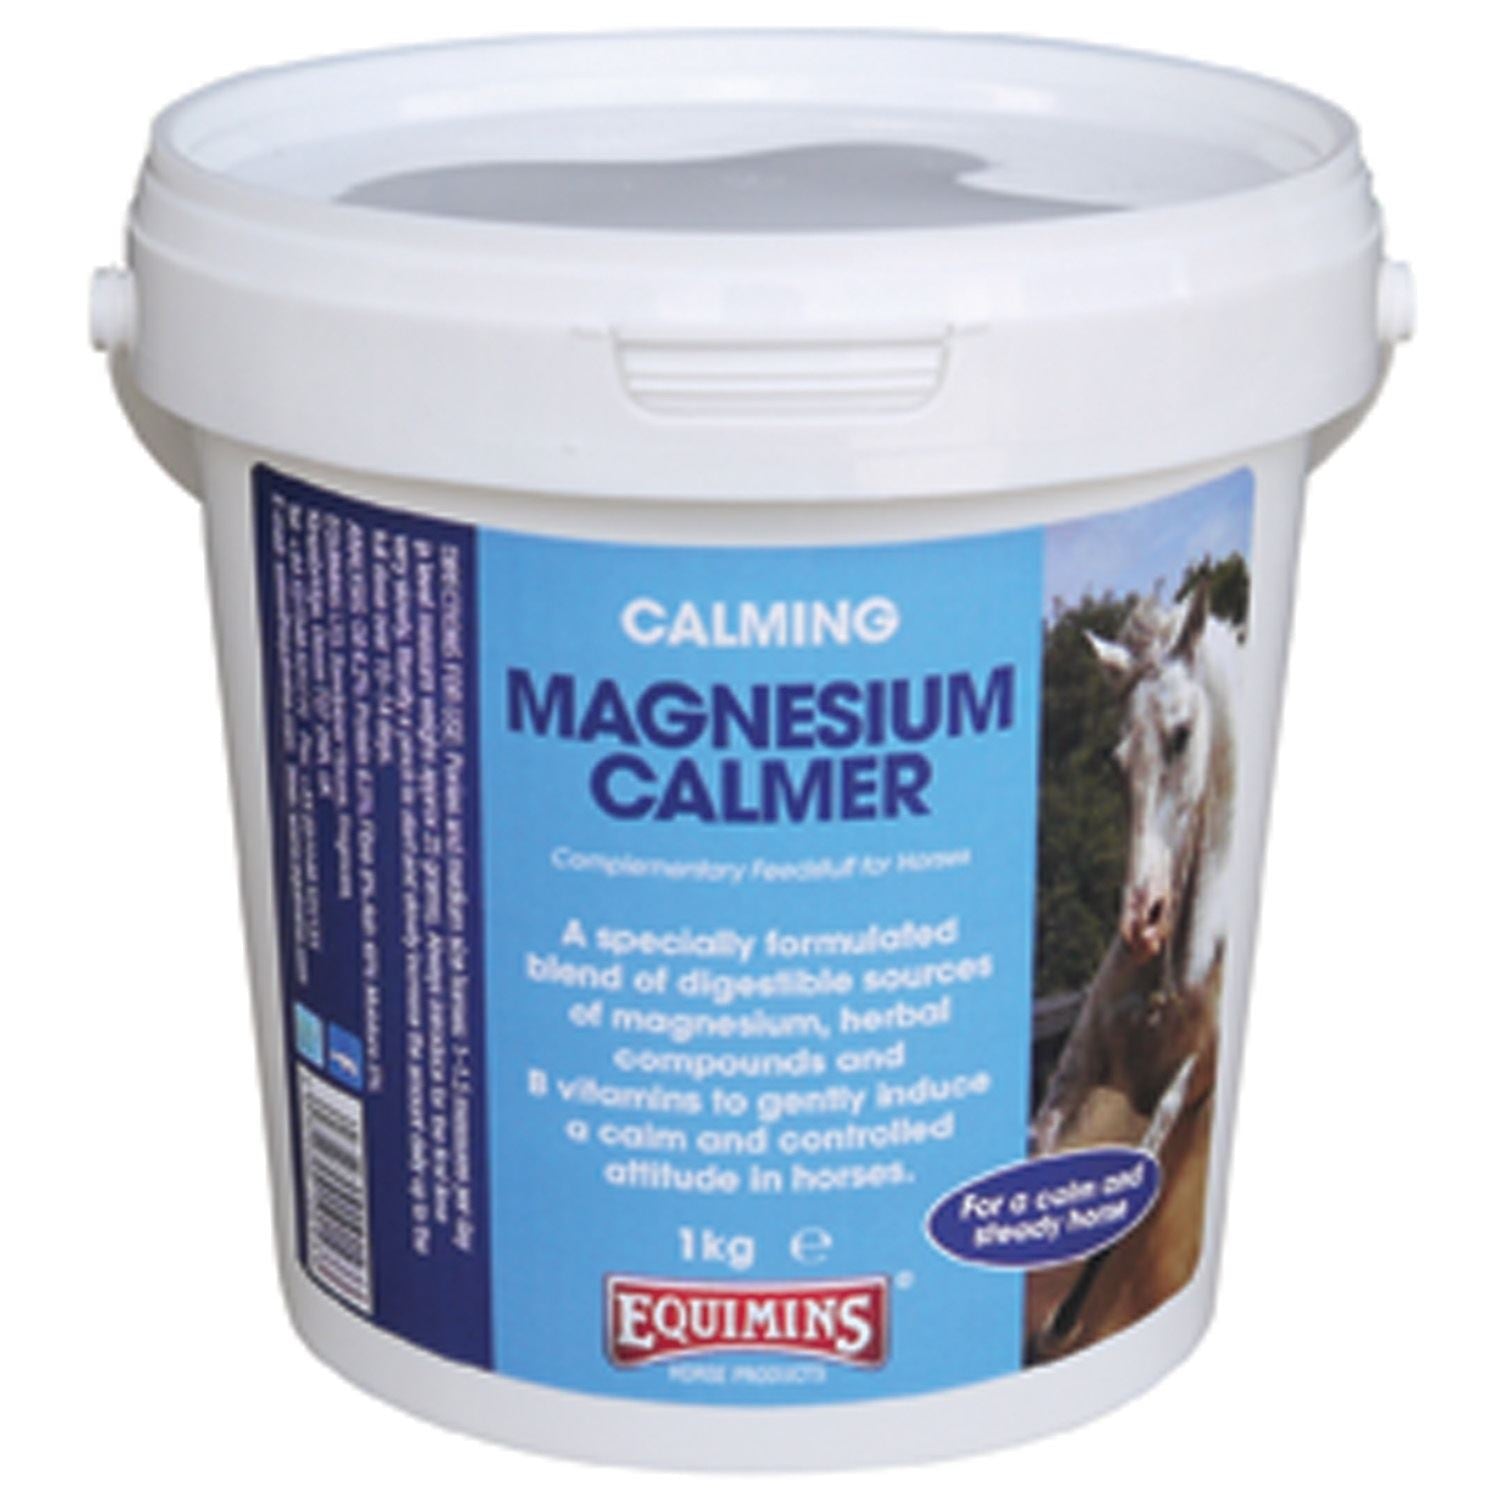 EQUIMINS MAGNESIUM CALMER SUPPLEMENT for Calm and Controlled Behavior